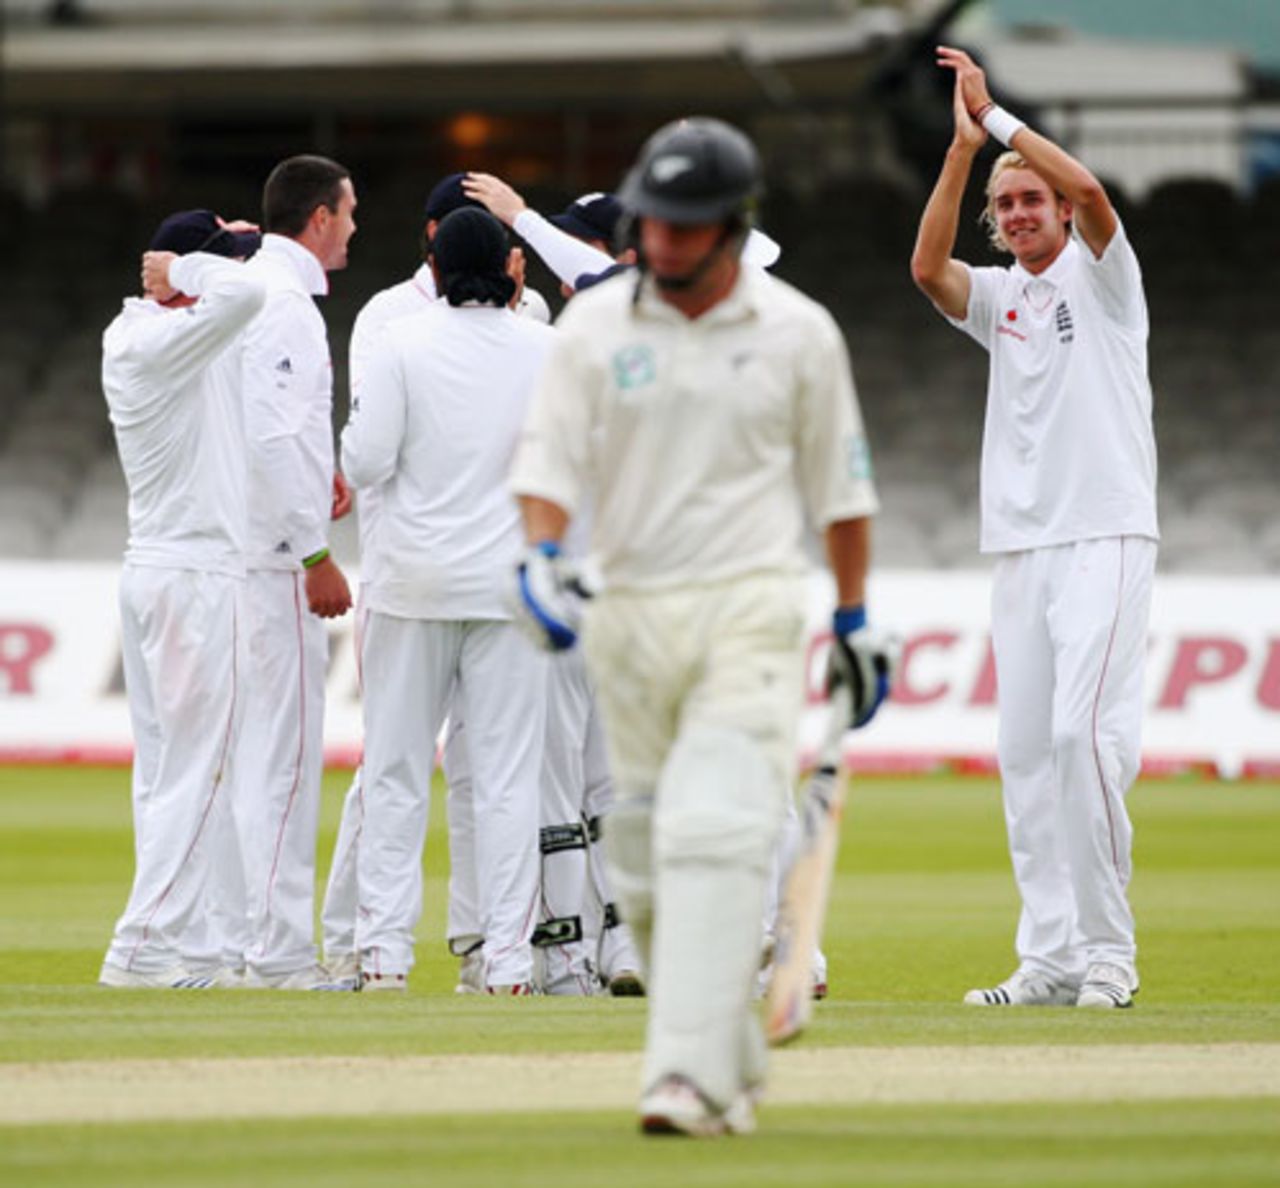 Stuart Broad and his team-mates celebrate the wicket of Jamie How, England v New Zealand, 1st Test, Lord's, May 19, 2008